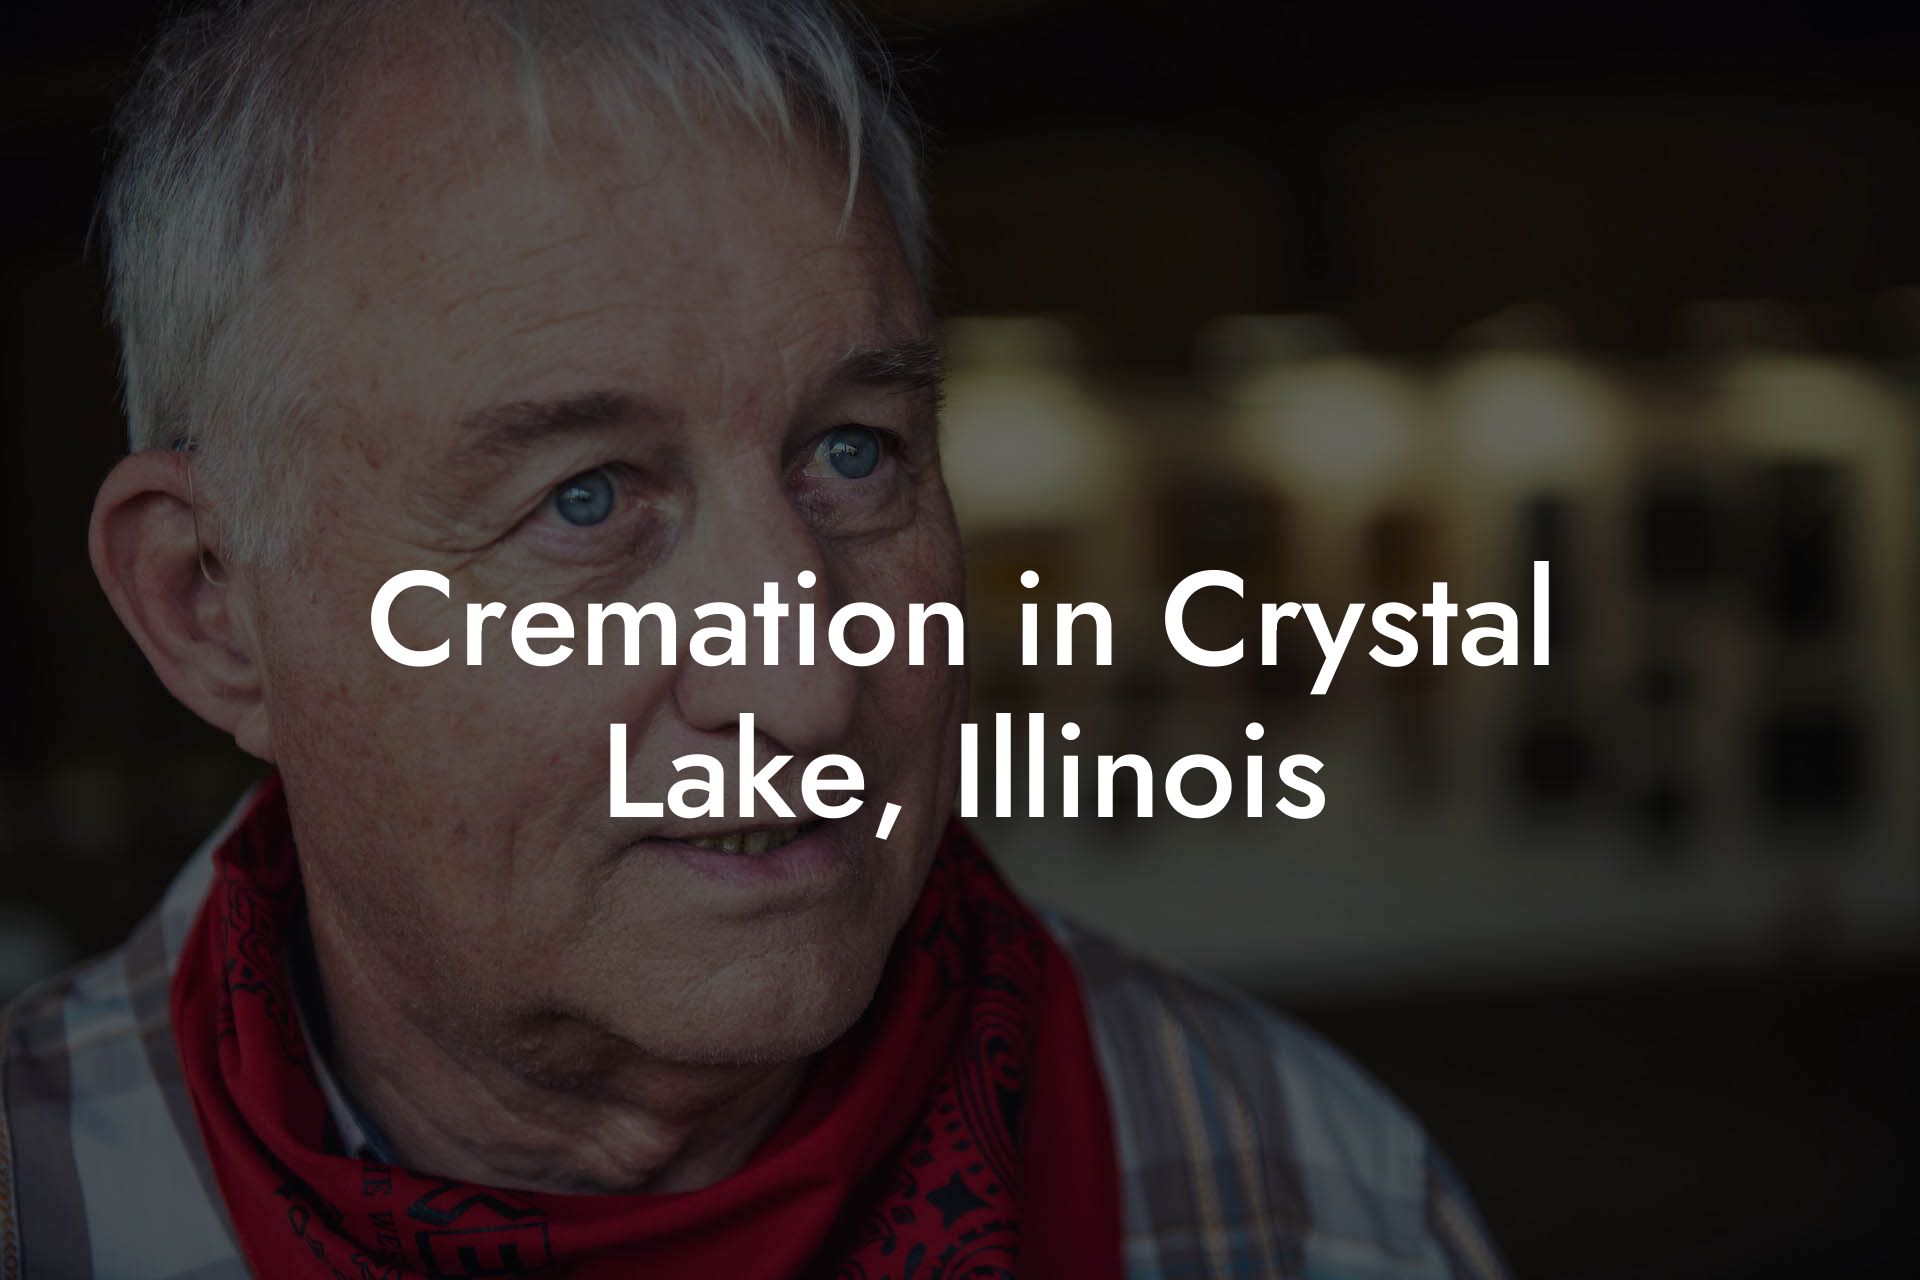 Cremation in Crystal Lake, Illinois